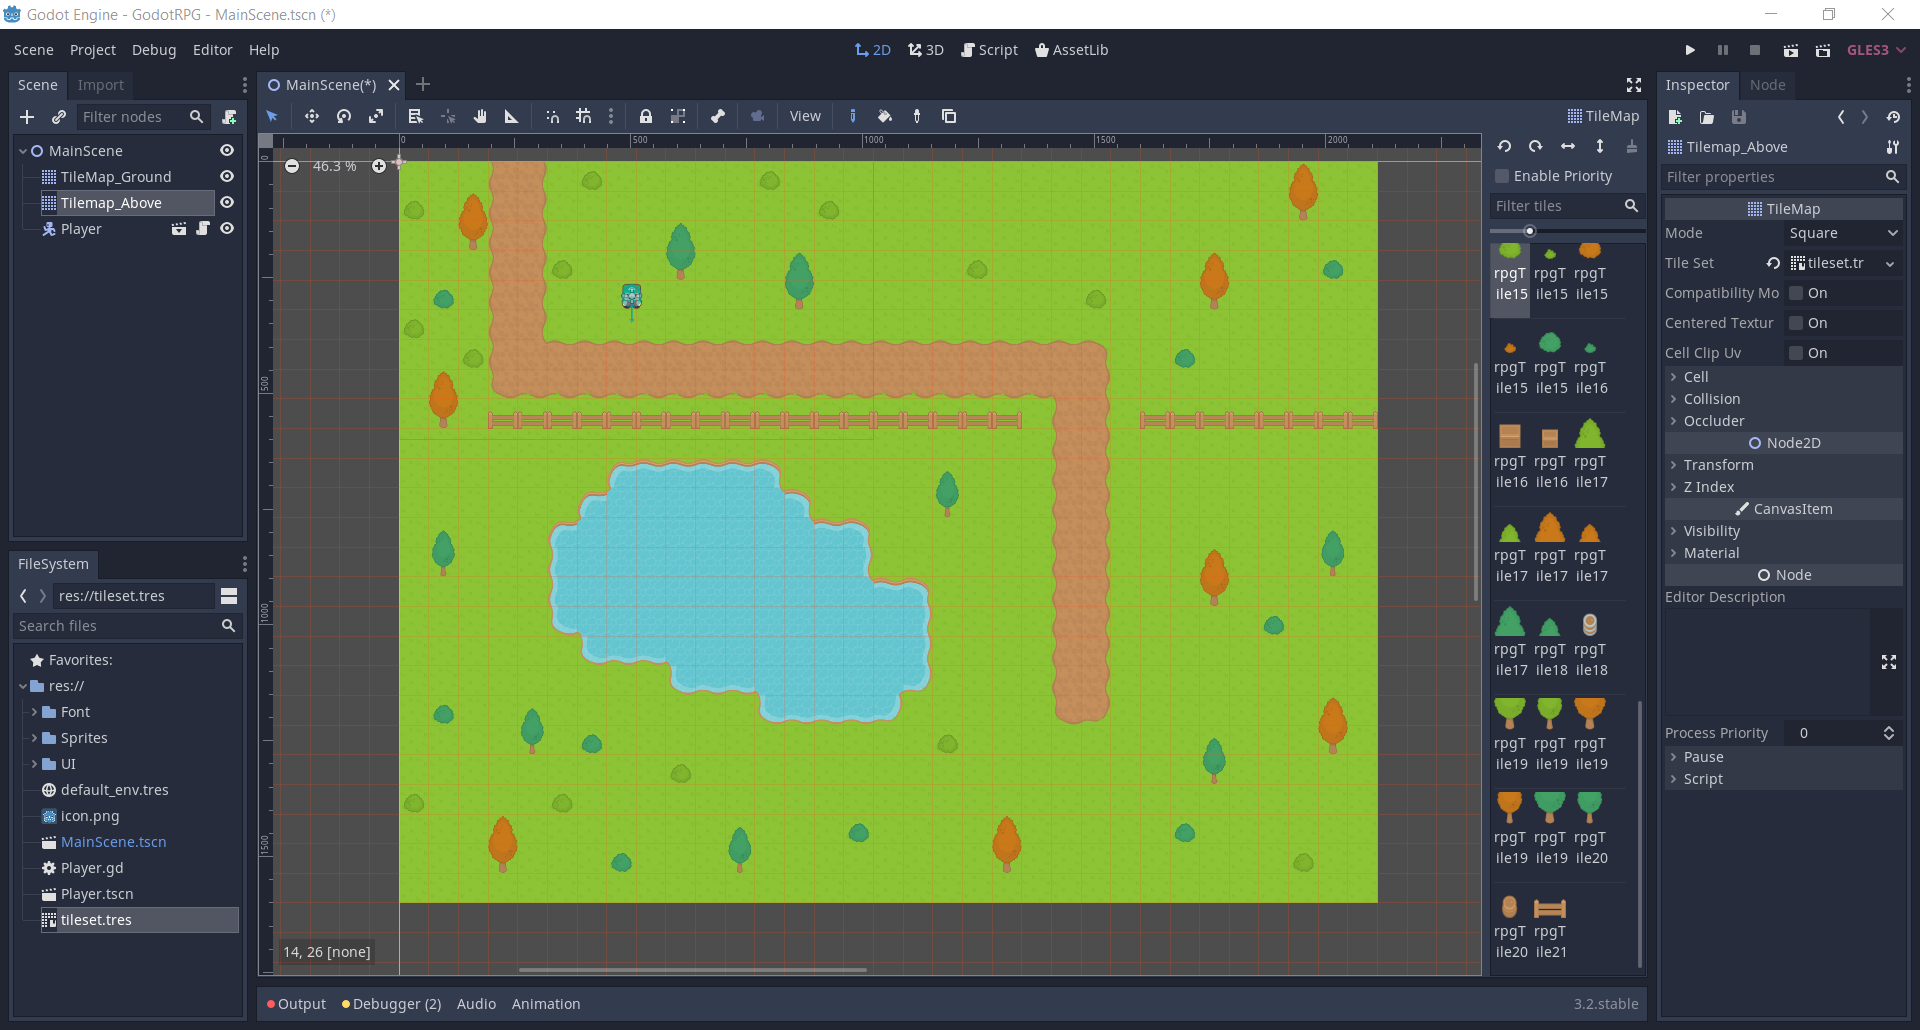 Godot 2D RPG project with player and completed tilemap